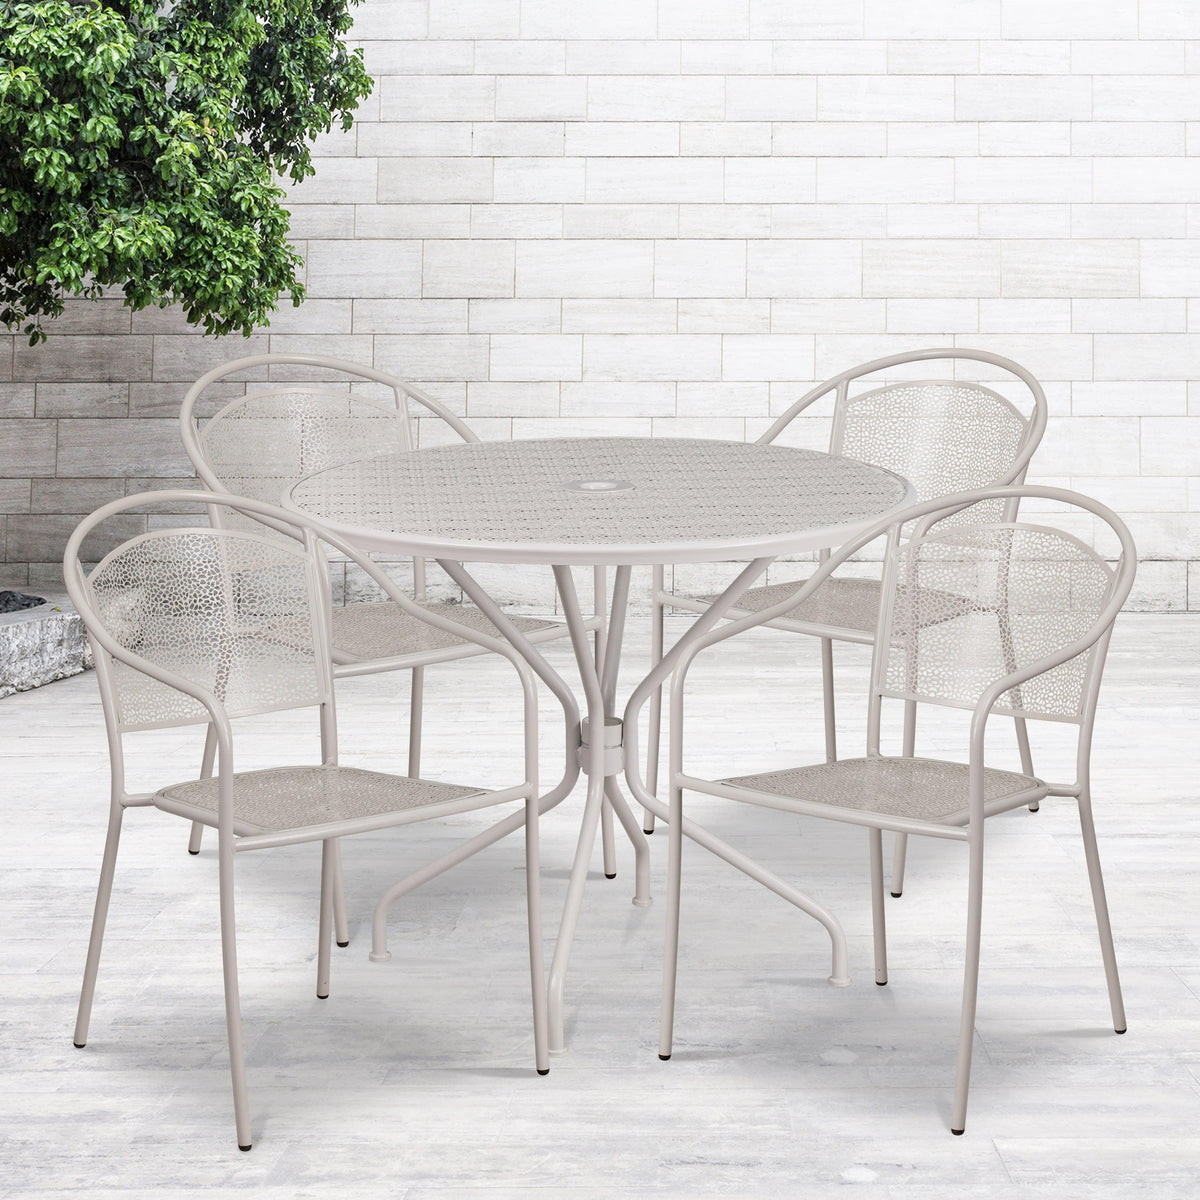 Light Gray |#| 35.25inch Round Lt Gray Indoor-Outdoor Steel Patio Table Set w/ 4 Round Back Chairs